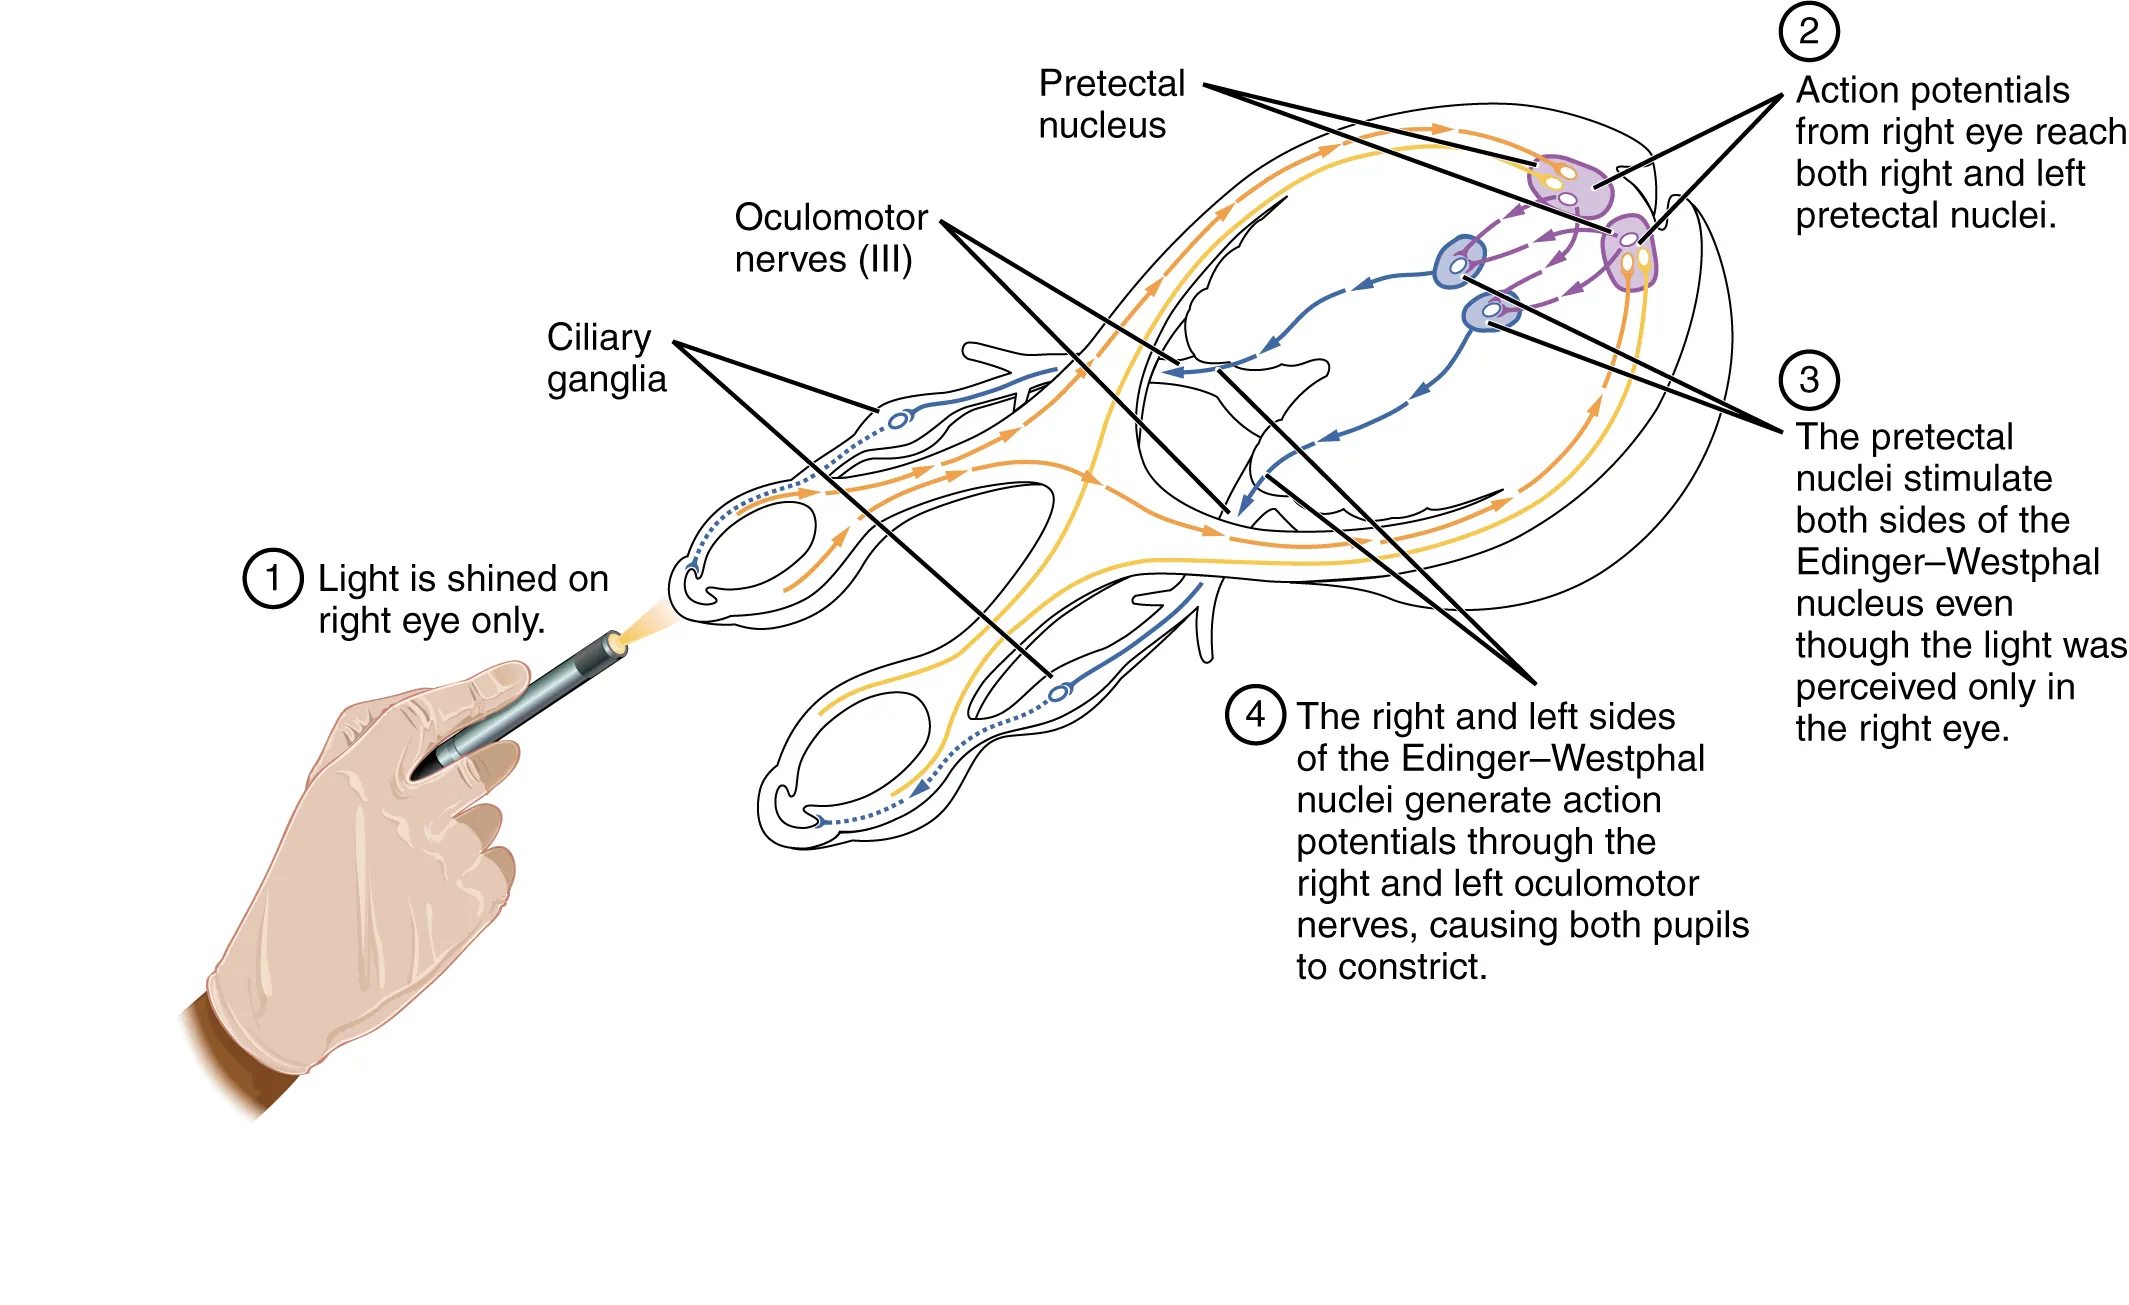 This diagram shows the connections between the different nerves and pathways in the eyes. A hand is shown shining a light on the right eye, and arrows and text callouts indicate the different pathways that are activated.